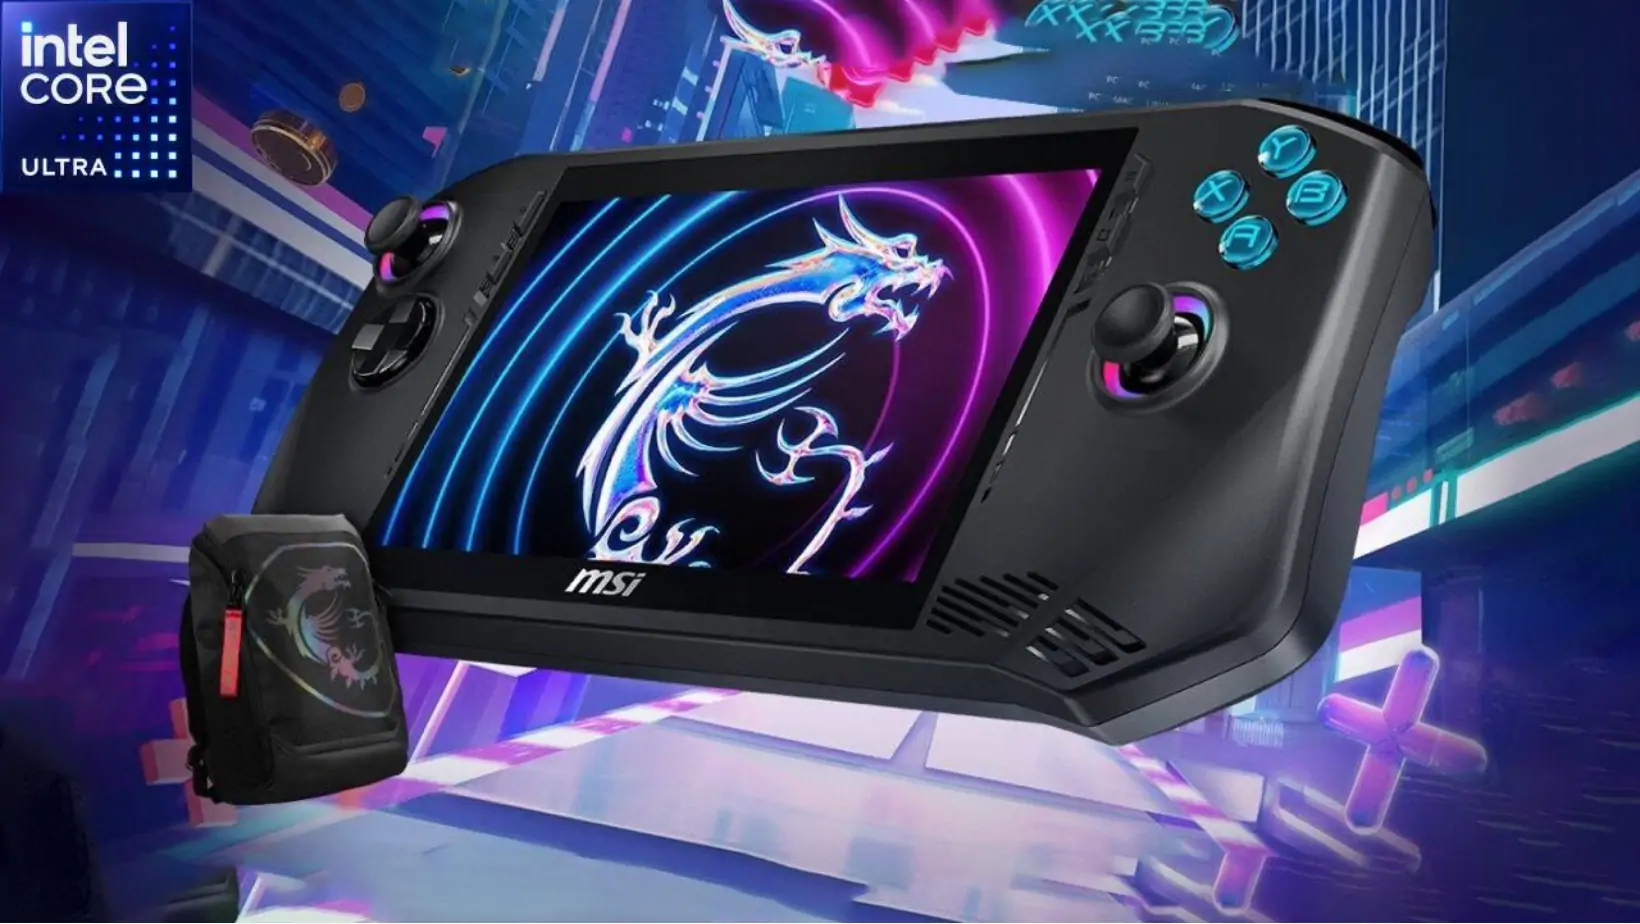 MSI Claw Handheld Gaming PC Faces Controversy Over Variable Refresh Rate Claims